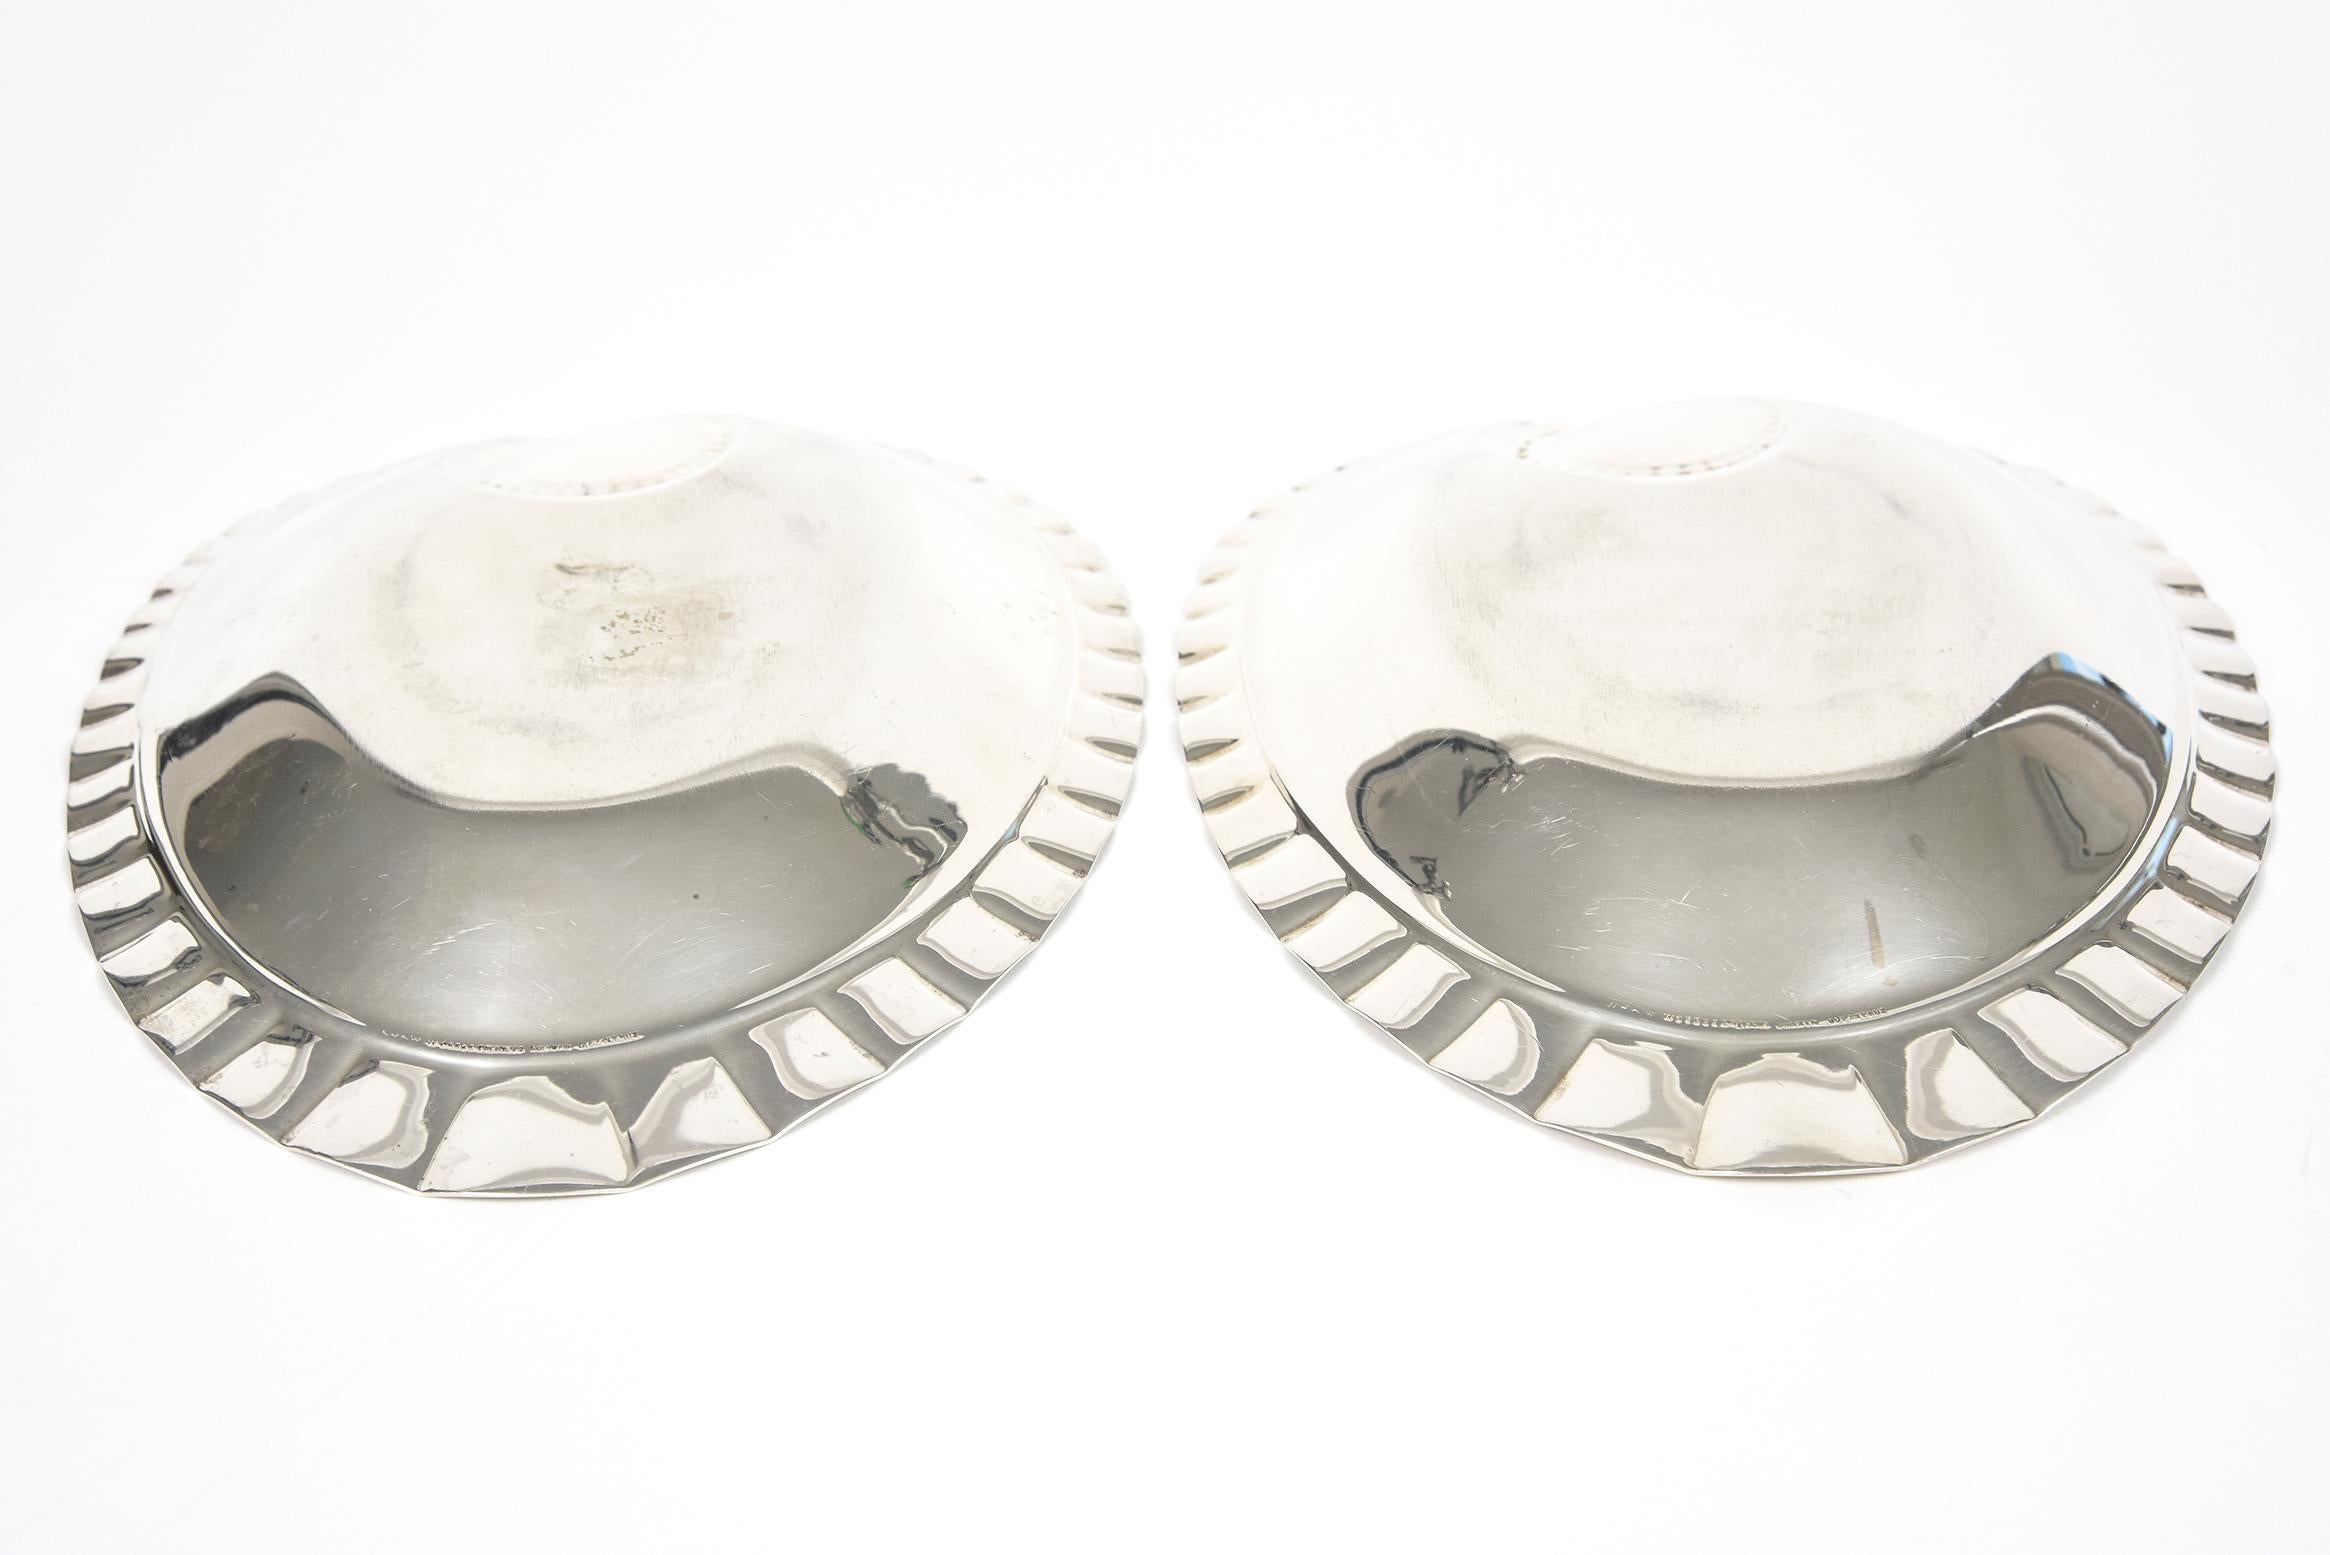 Pair of Tiffany & Co. Scalloped Heart Shaped Sterling Silver Candy Dish Bowls For Sale 8